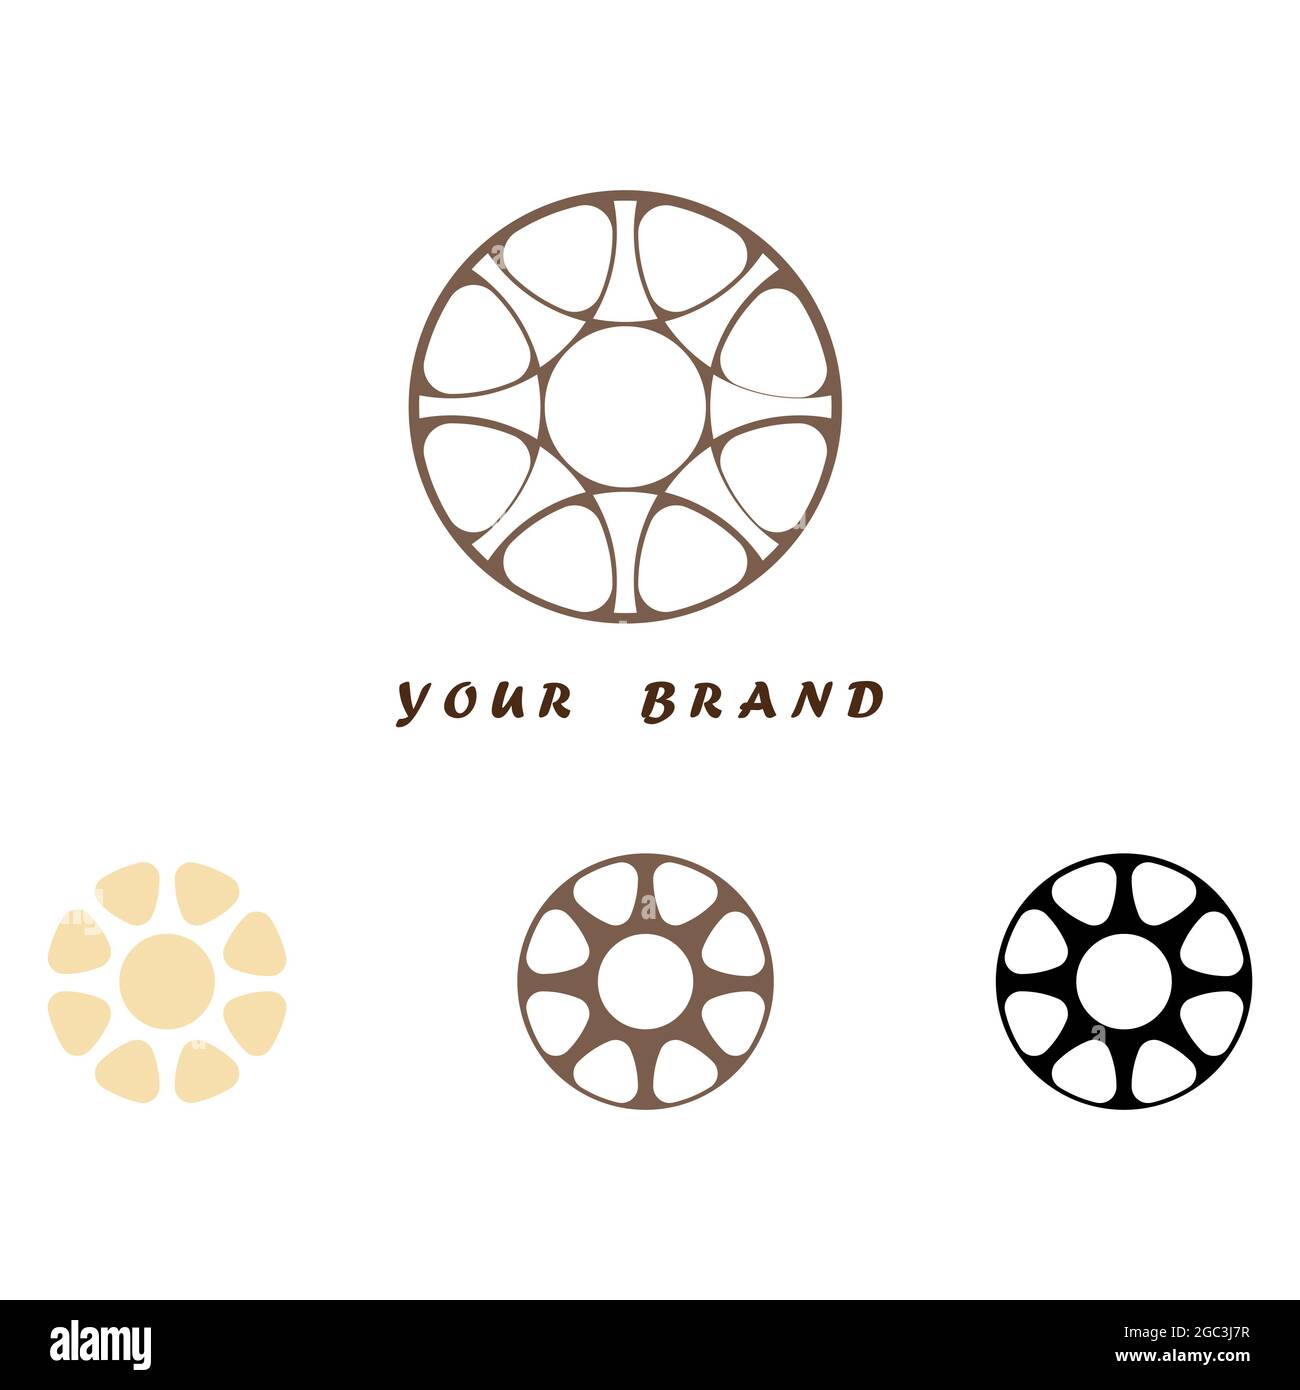 Illustration of a circle-shaped logo design with three different versions on a white background Stock Photo